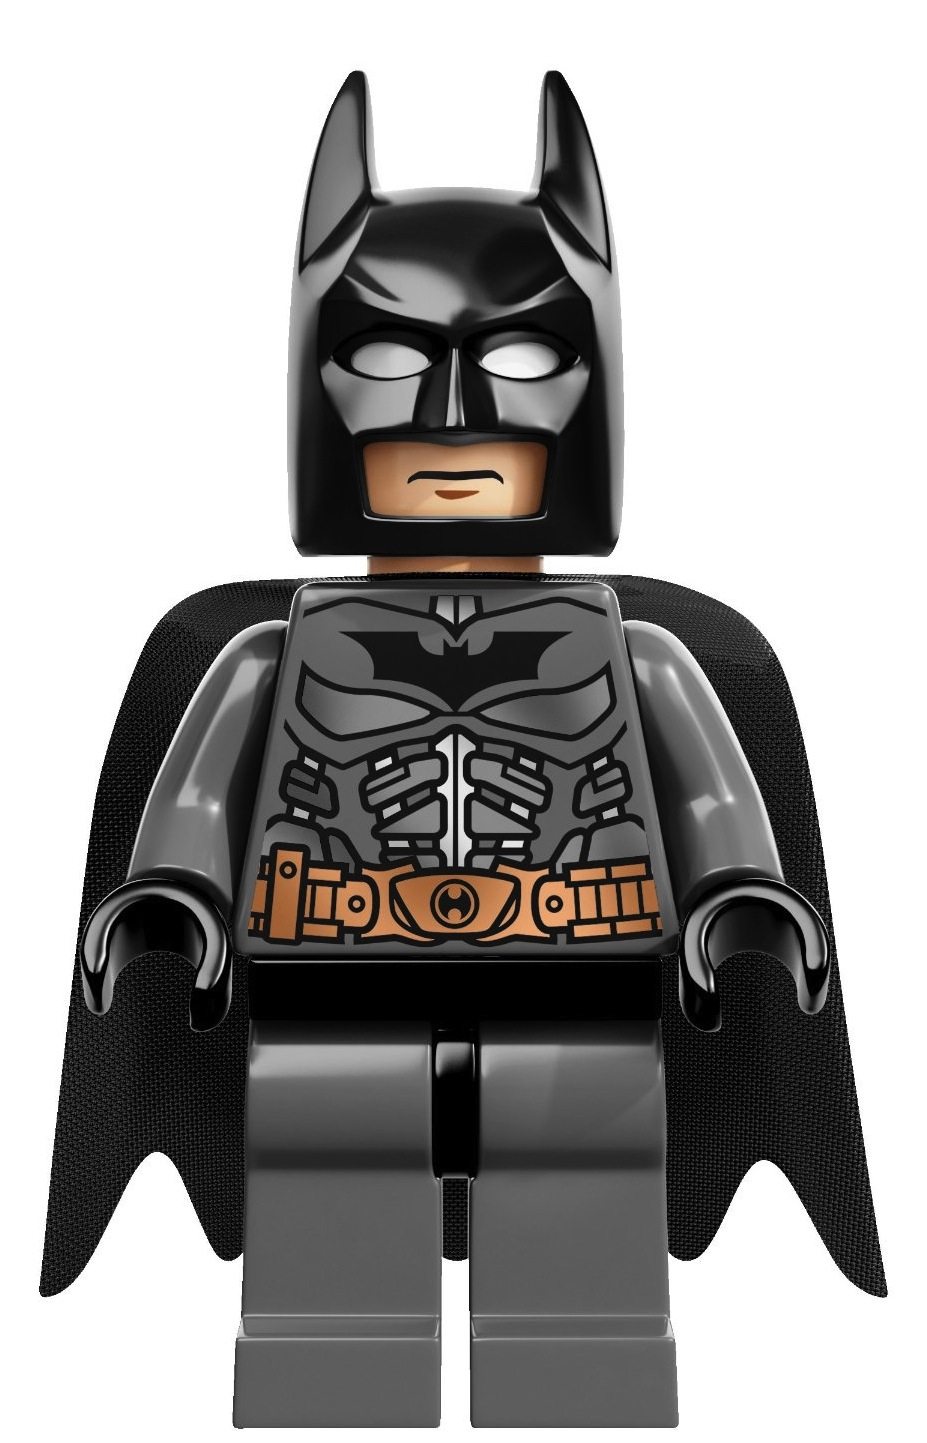 Lego Batman Super Heroes Chase Set Includes The Bat And The Tumbler    